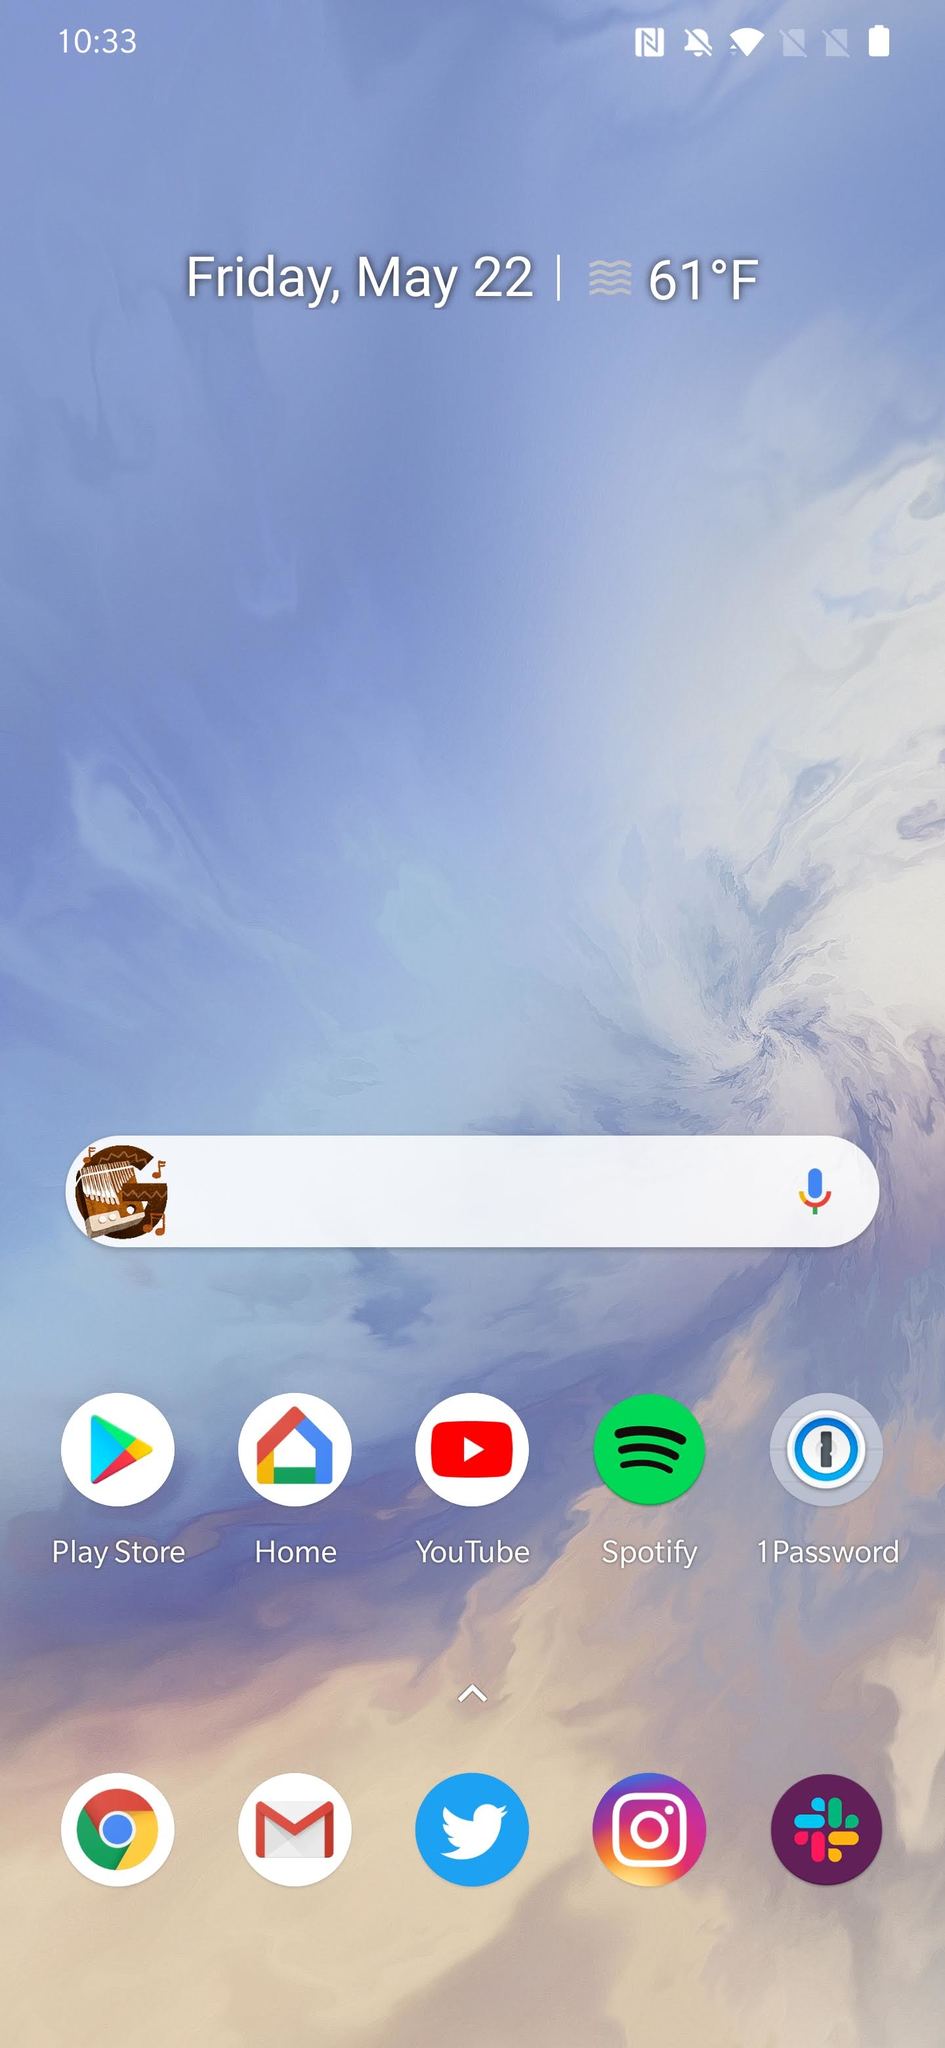 OxygenOS home screen